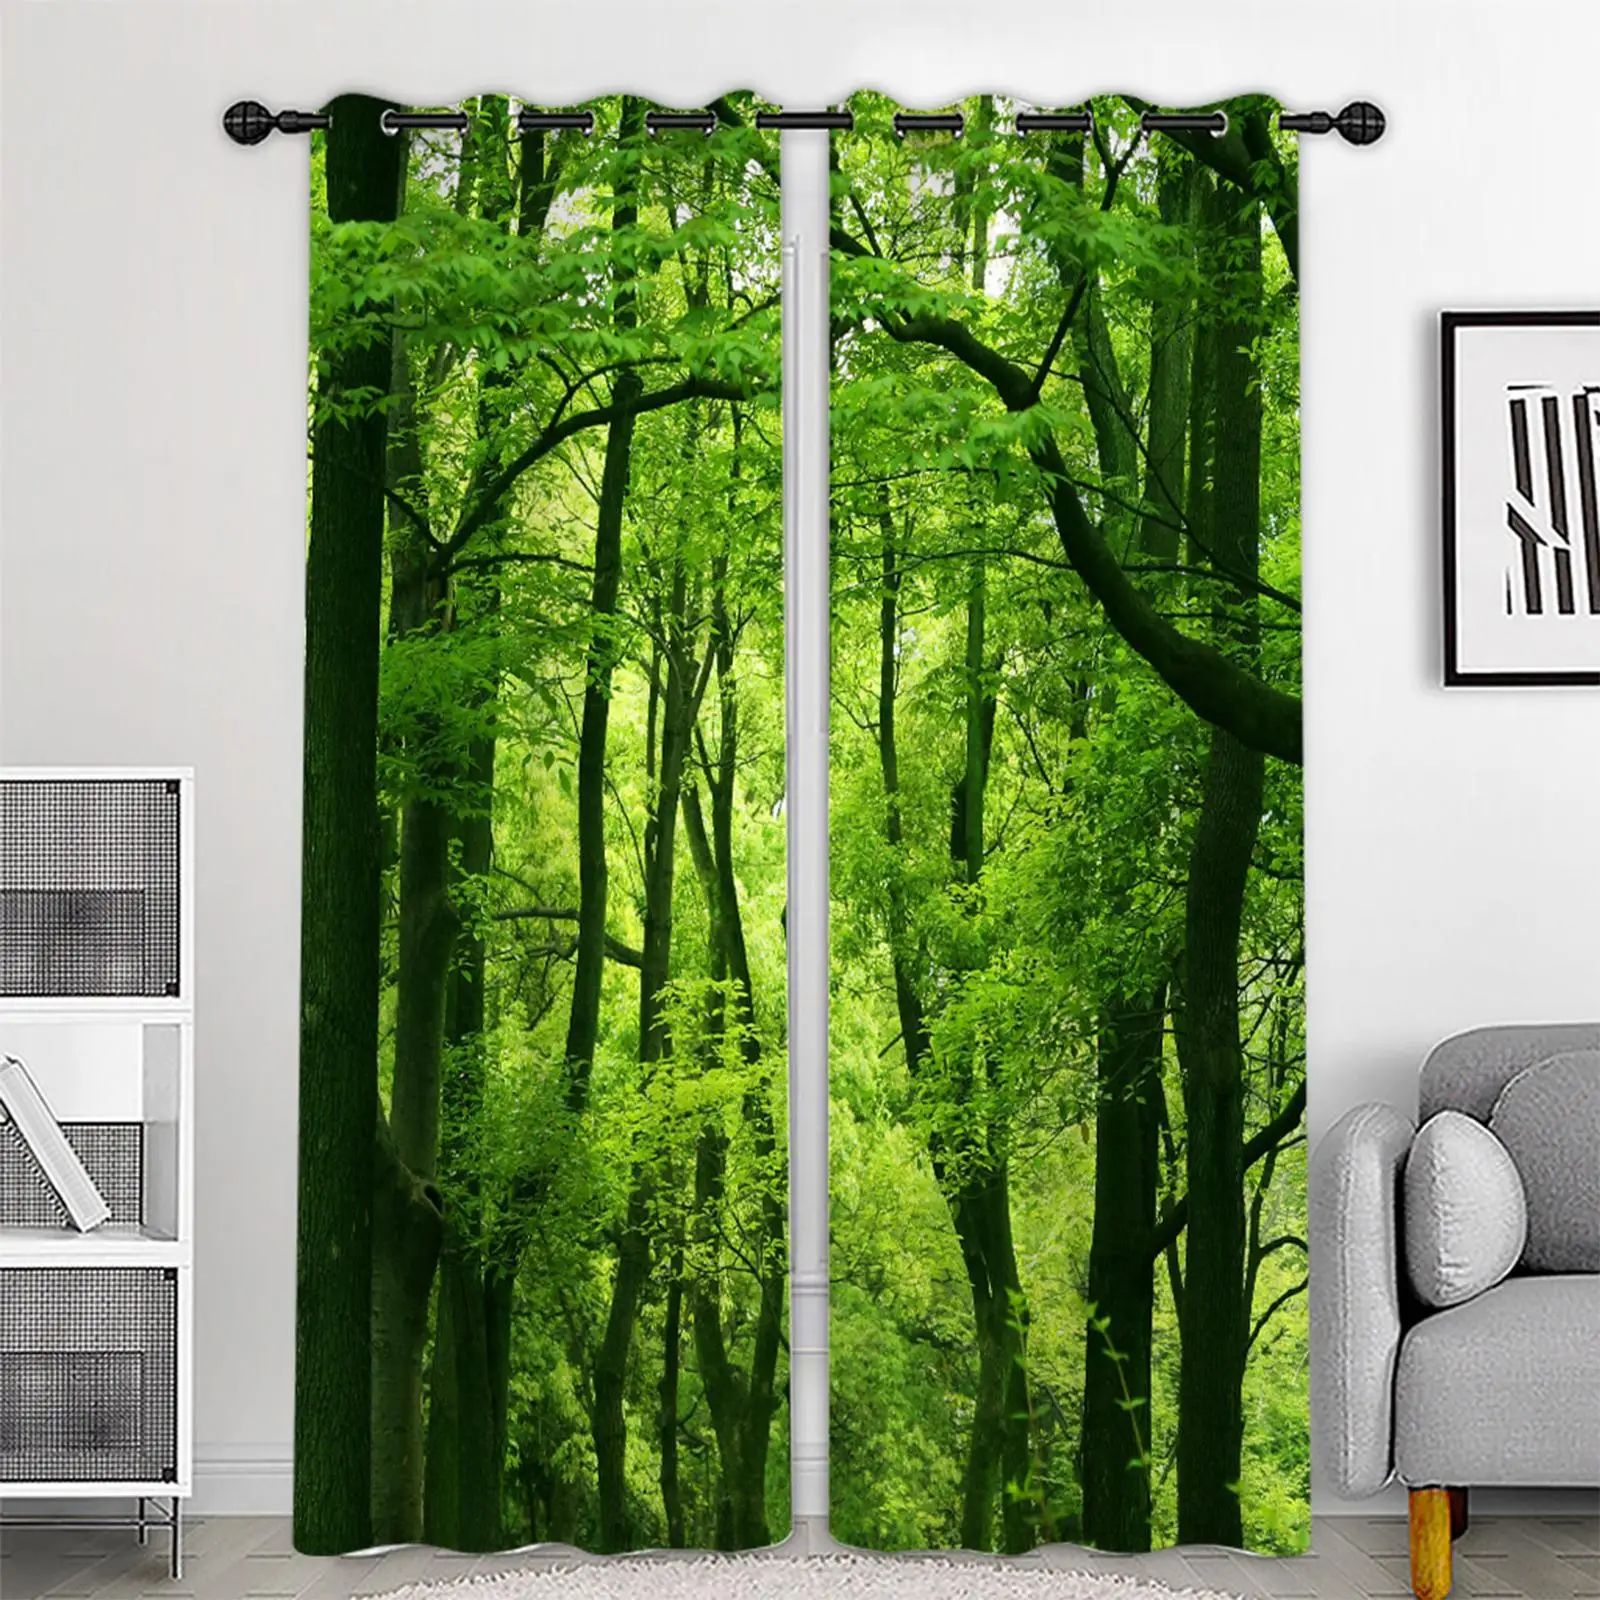 1 Pair Forest Pattern Print Curtain Noise Reduction Blackout Curtains